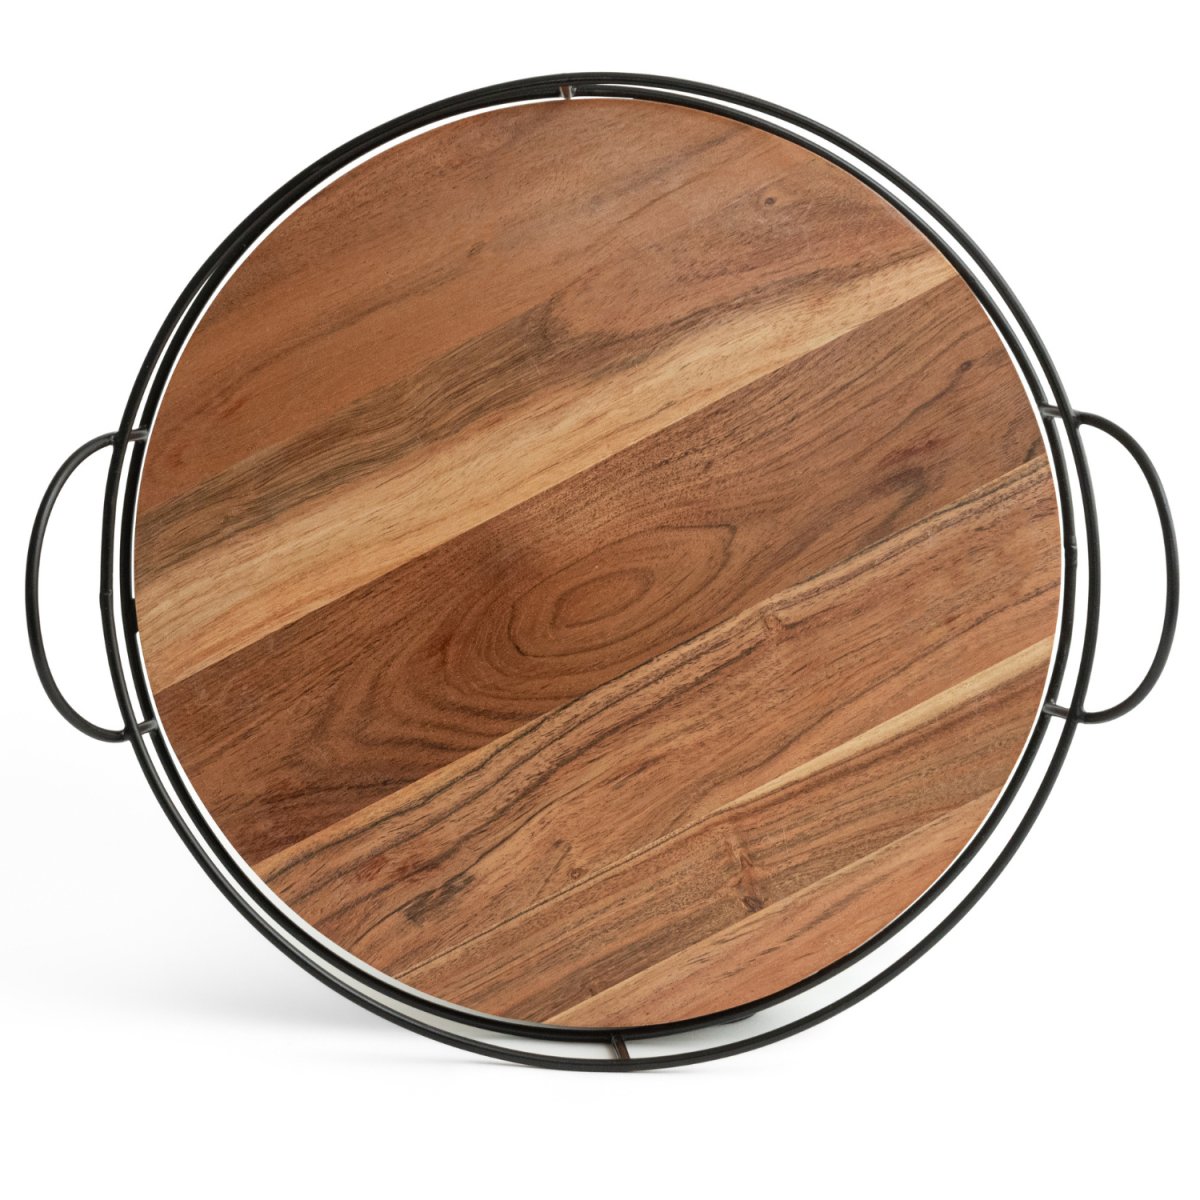 Round Wooden Decor Tray with black metal handles top image white background - Aesthetic Living